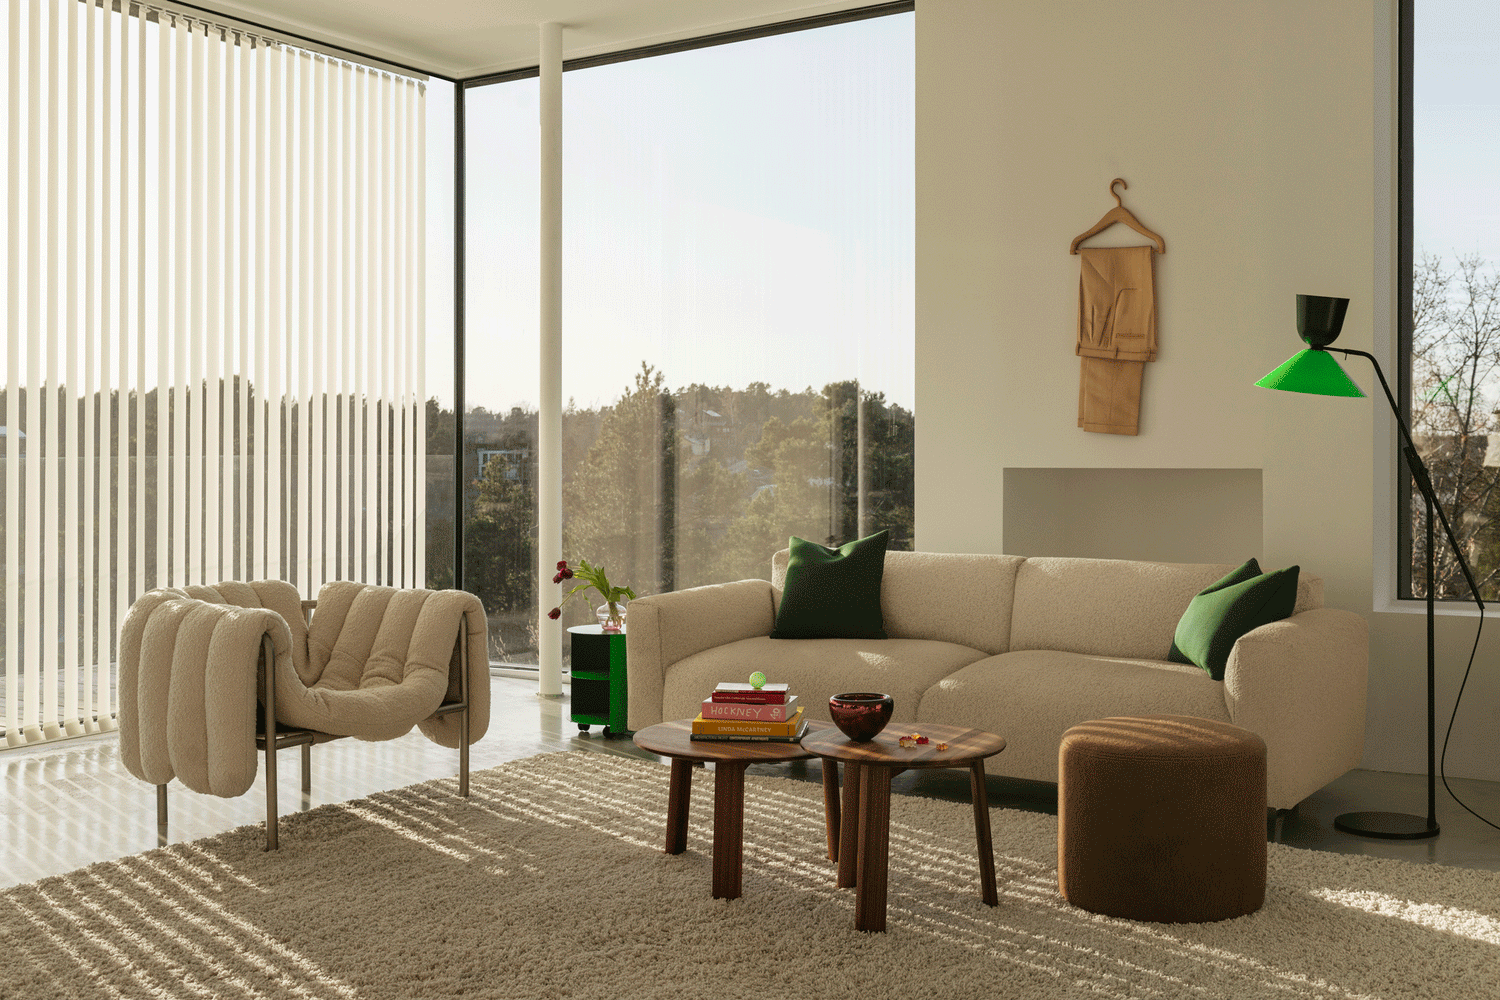 A living room scene featuring Puffy Lounge Chair Eggshell / Stainless Steel, Hide Side Table Pure Green, Koti 3-seater Sofa, Alle Coffee Tables Set of 2 Walnut, Bon Pouf Round Brown and an Alphabeta Floor Lamp.